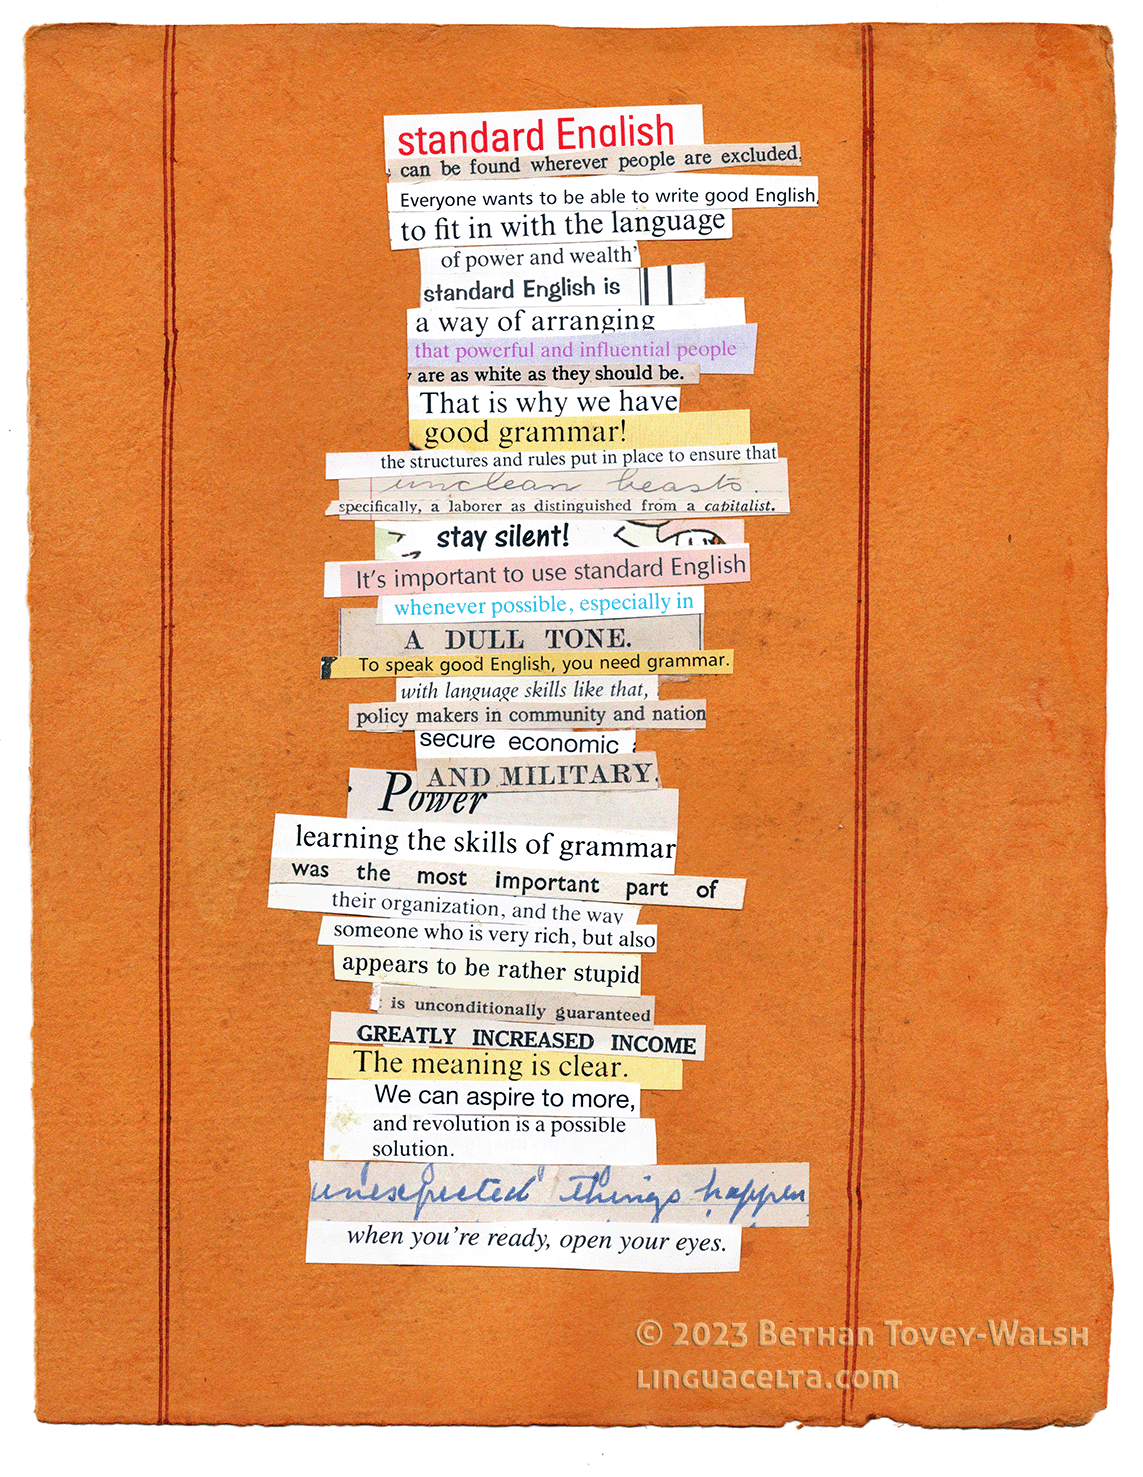 A series of phrases and words cut out from different kinds of printed paper, arranged vertically to make a poem. There is a transcript of the poem below this image.